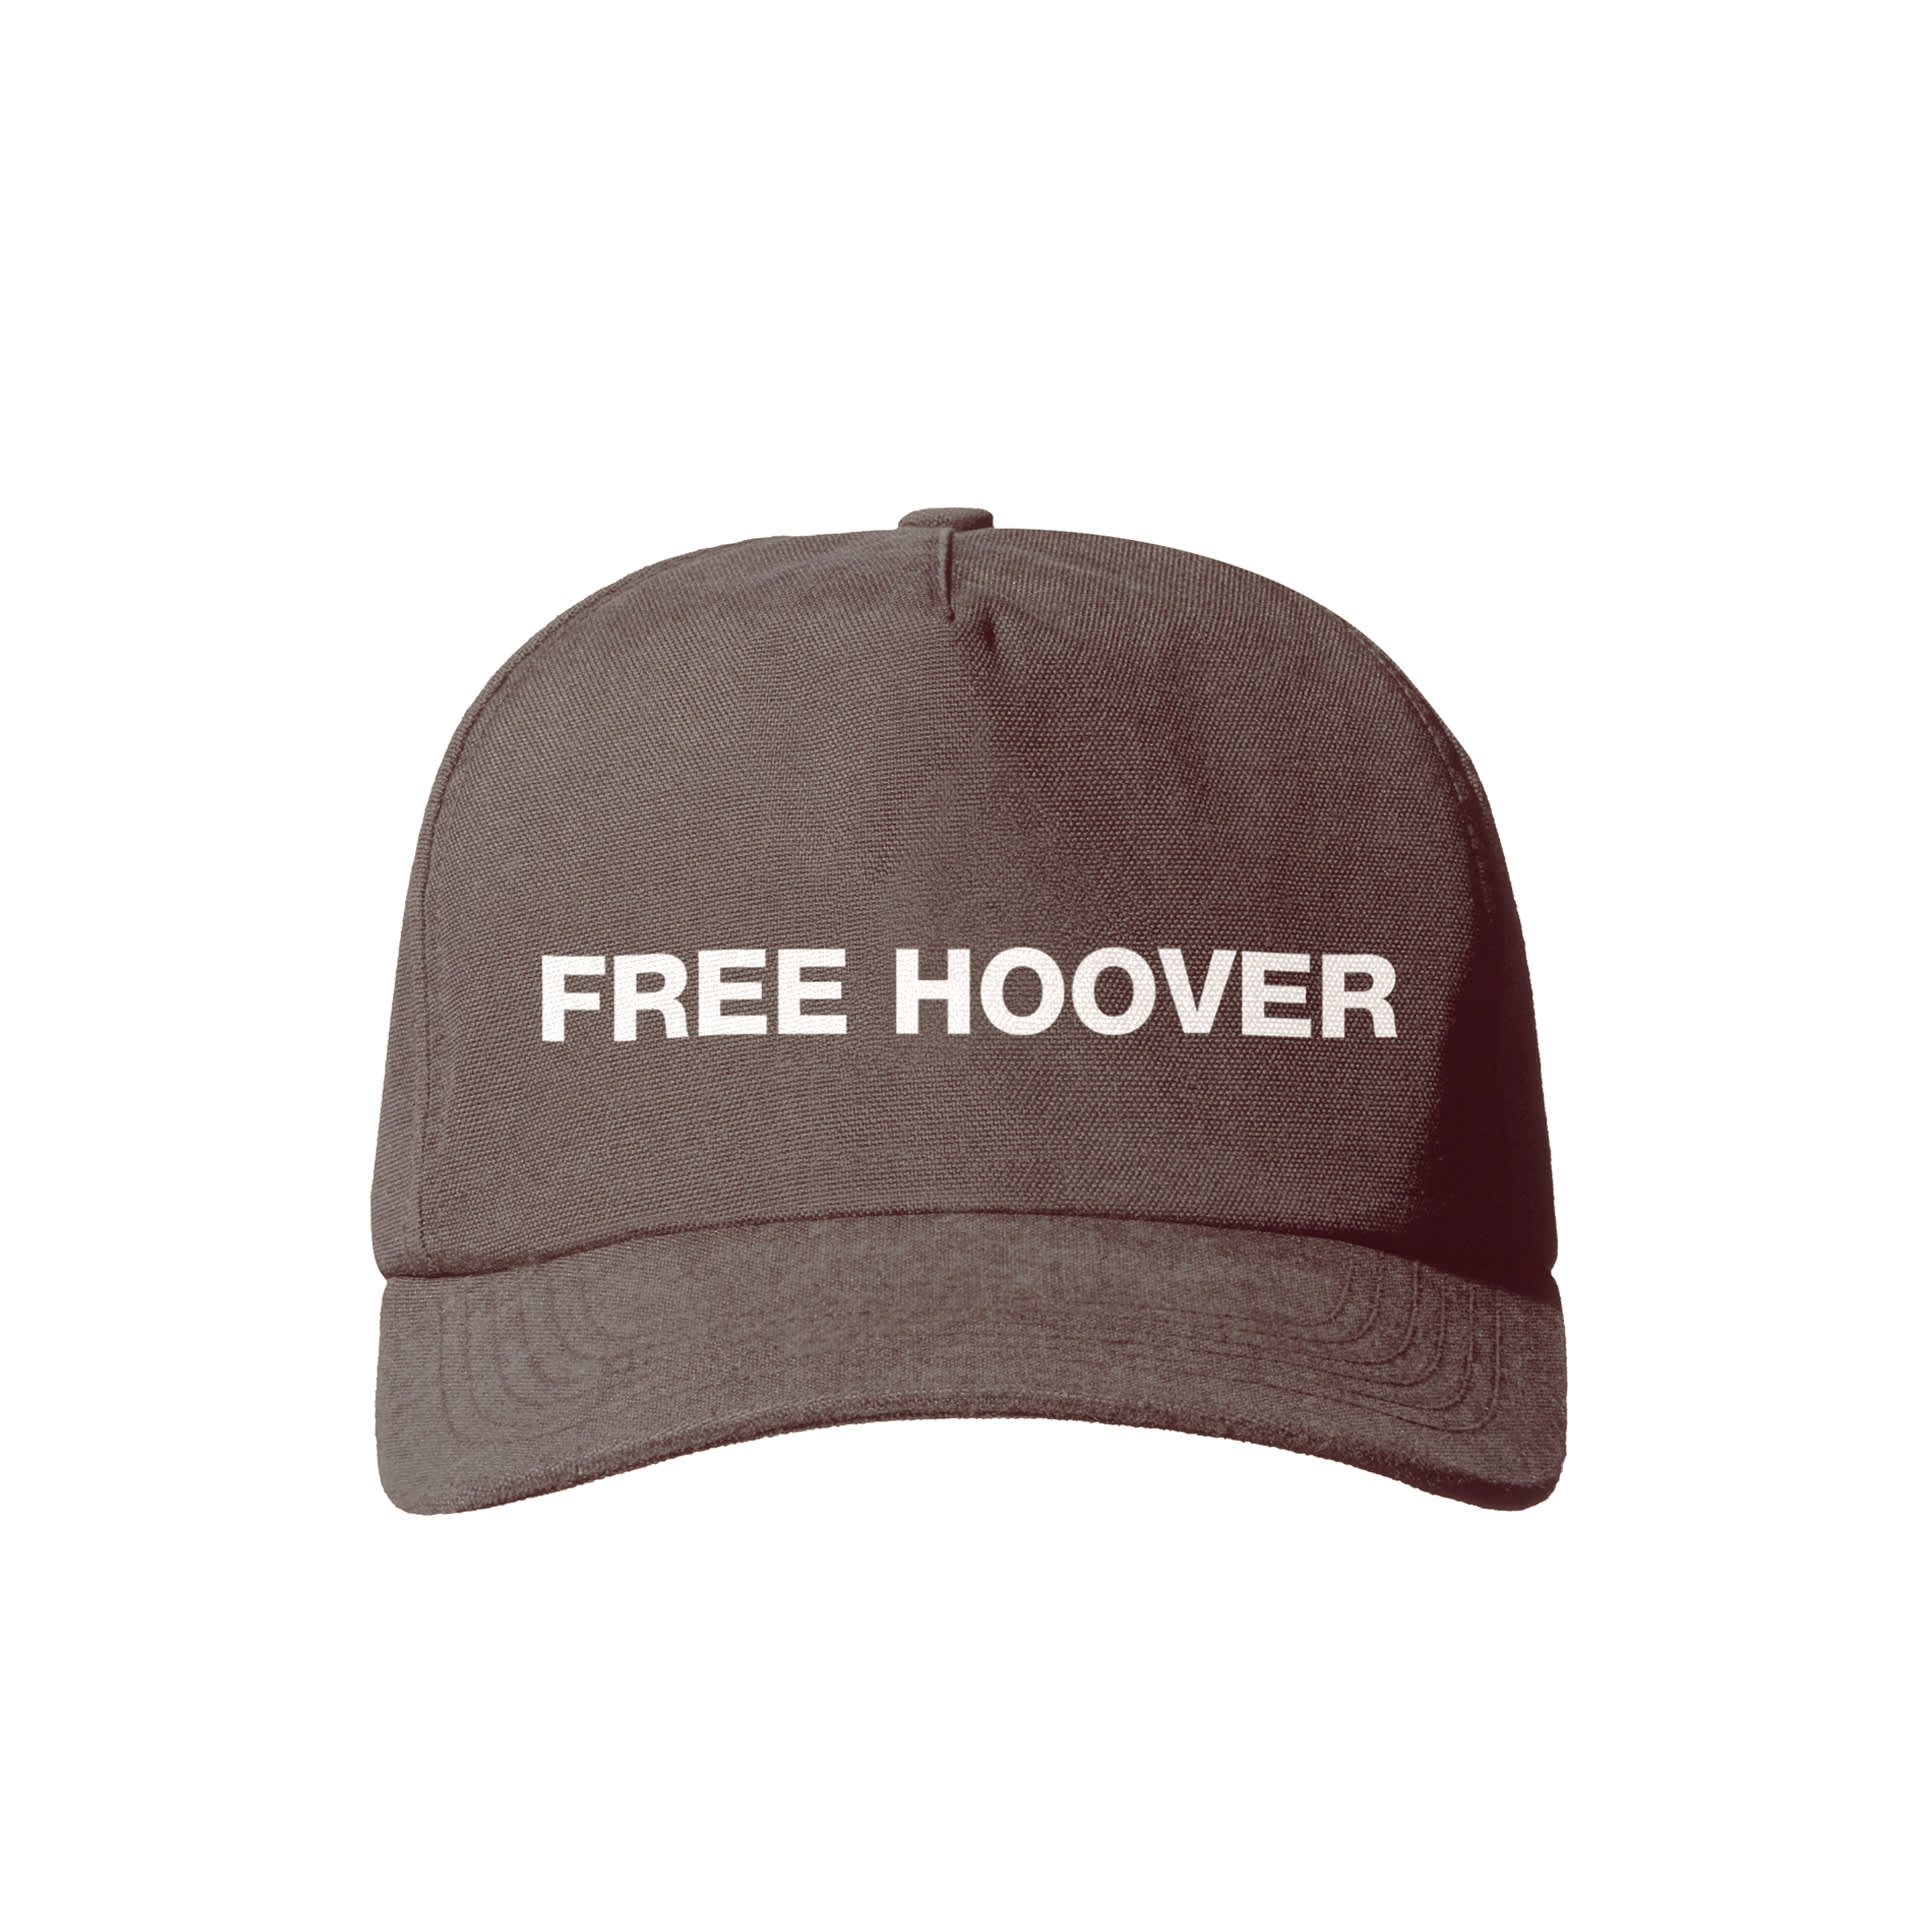 Kanye West Free Larry Hoover merch